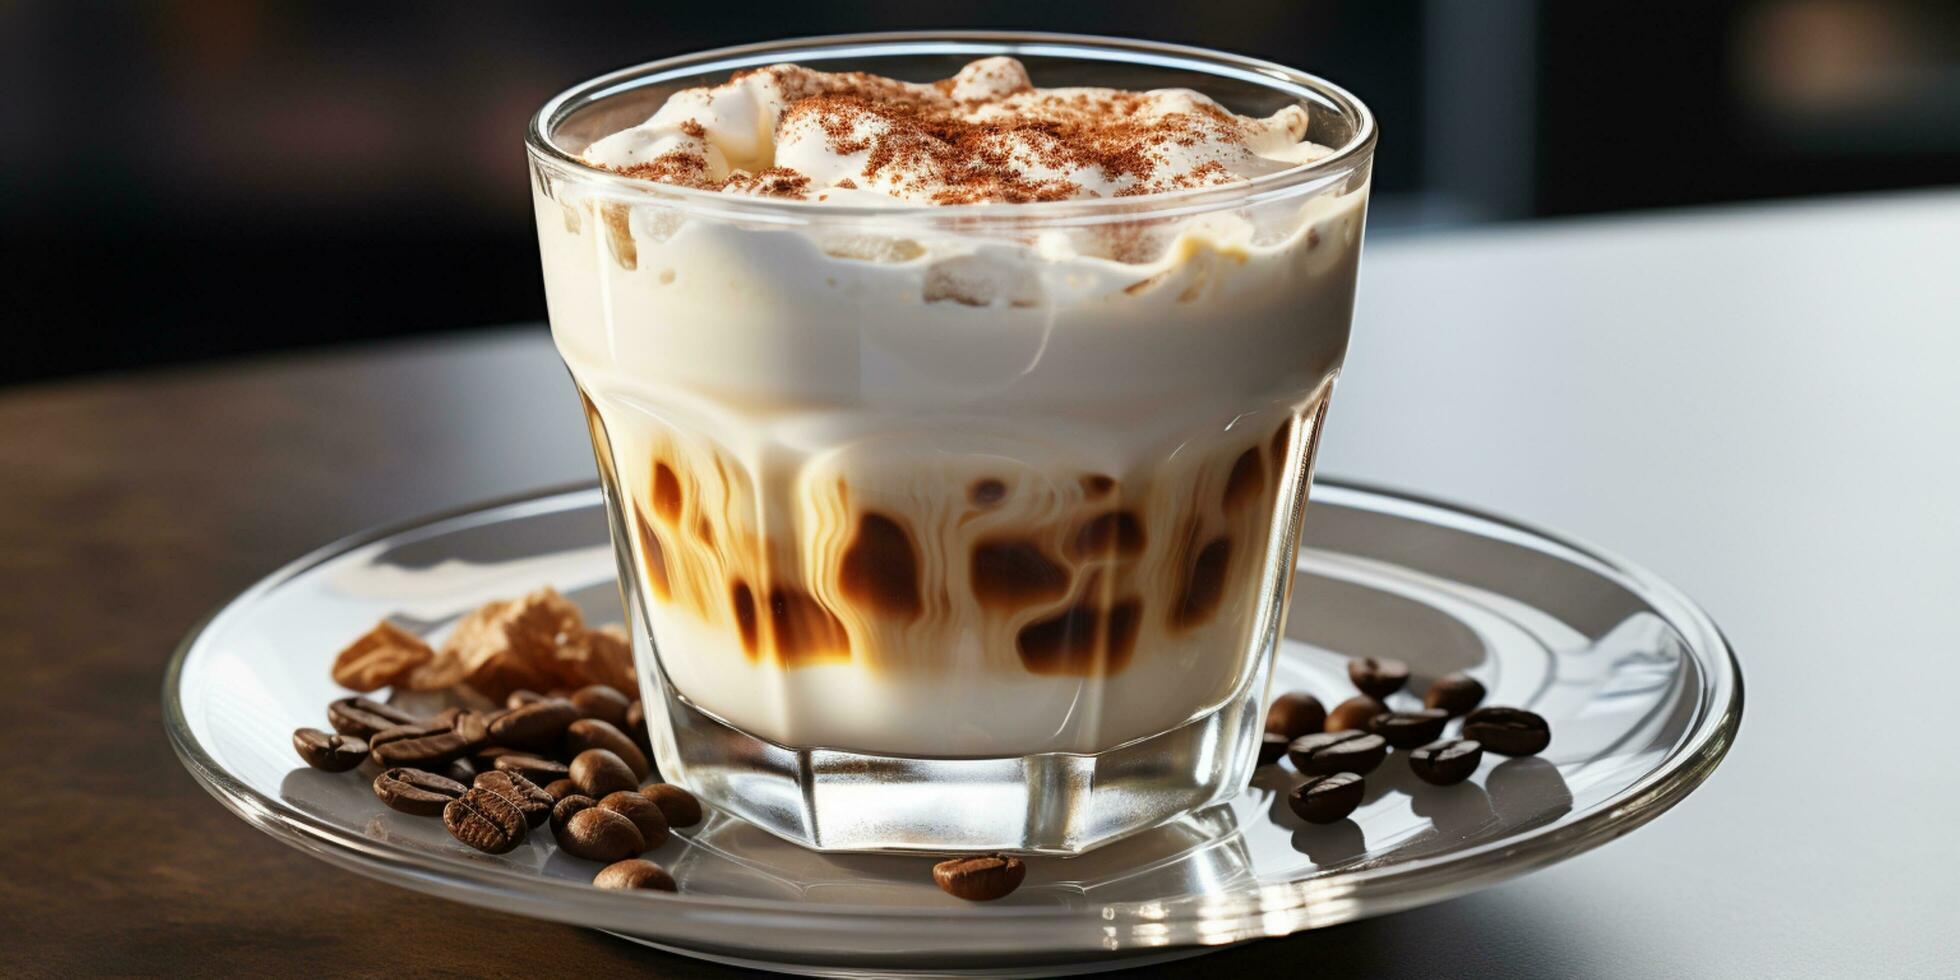 coffee in a transparent glass, a cup with milk foam photo